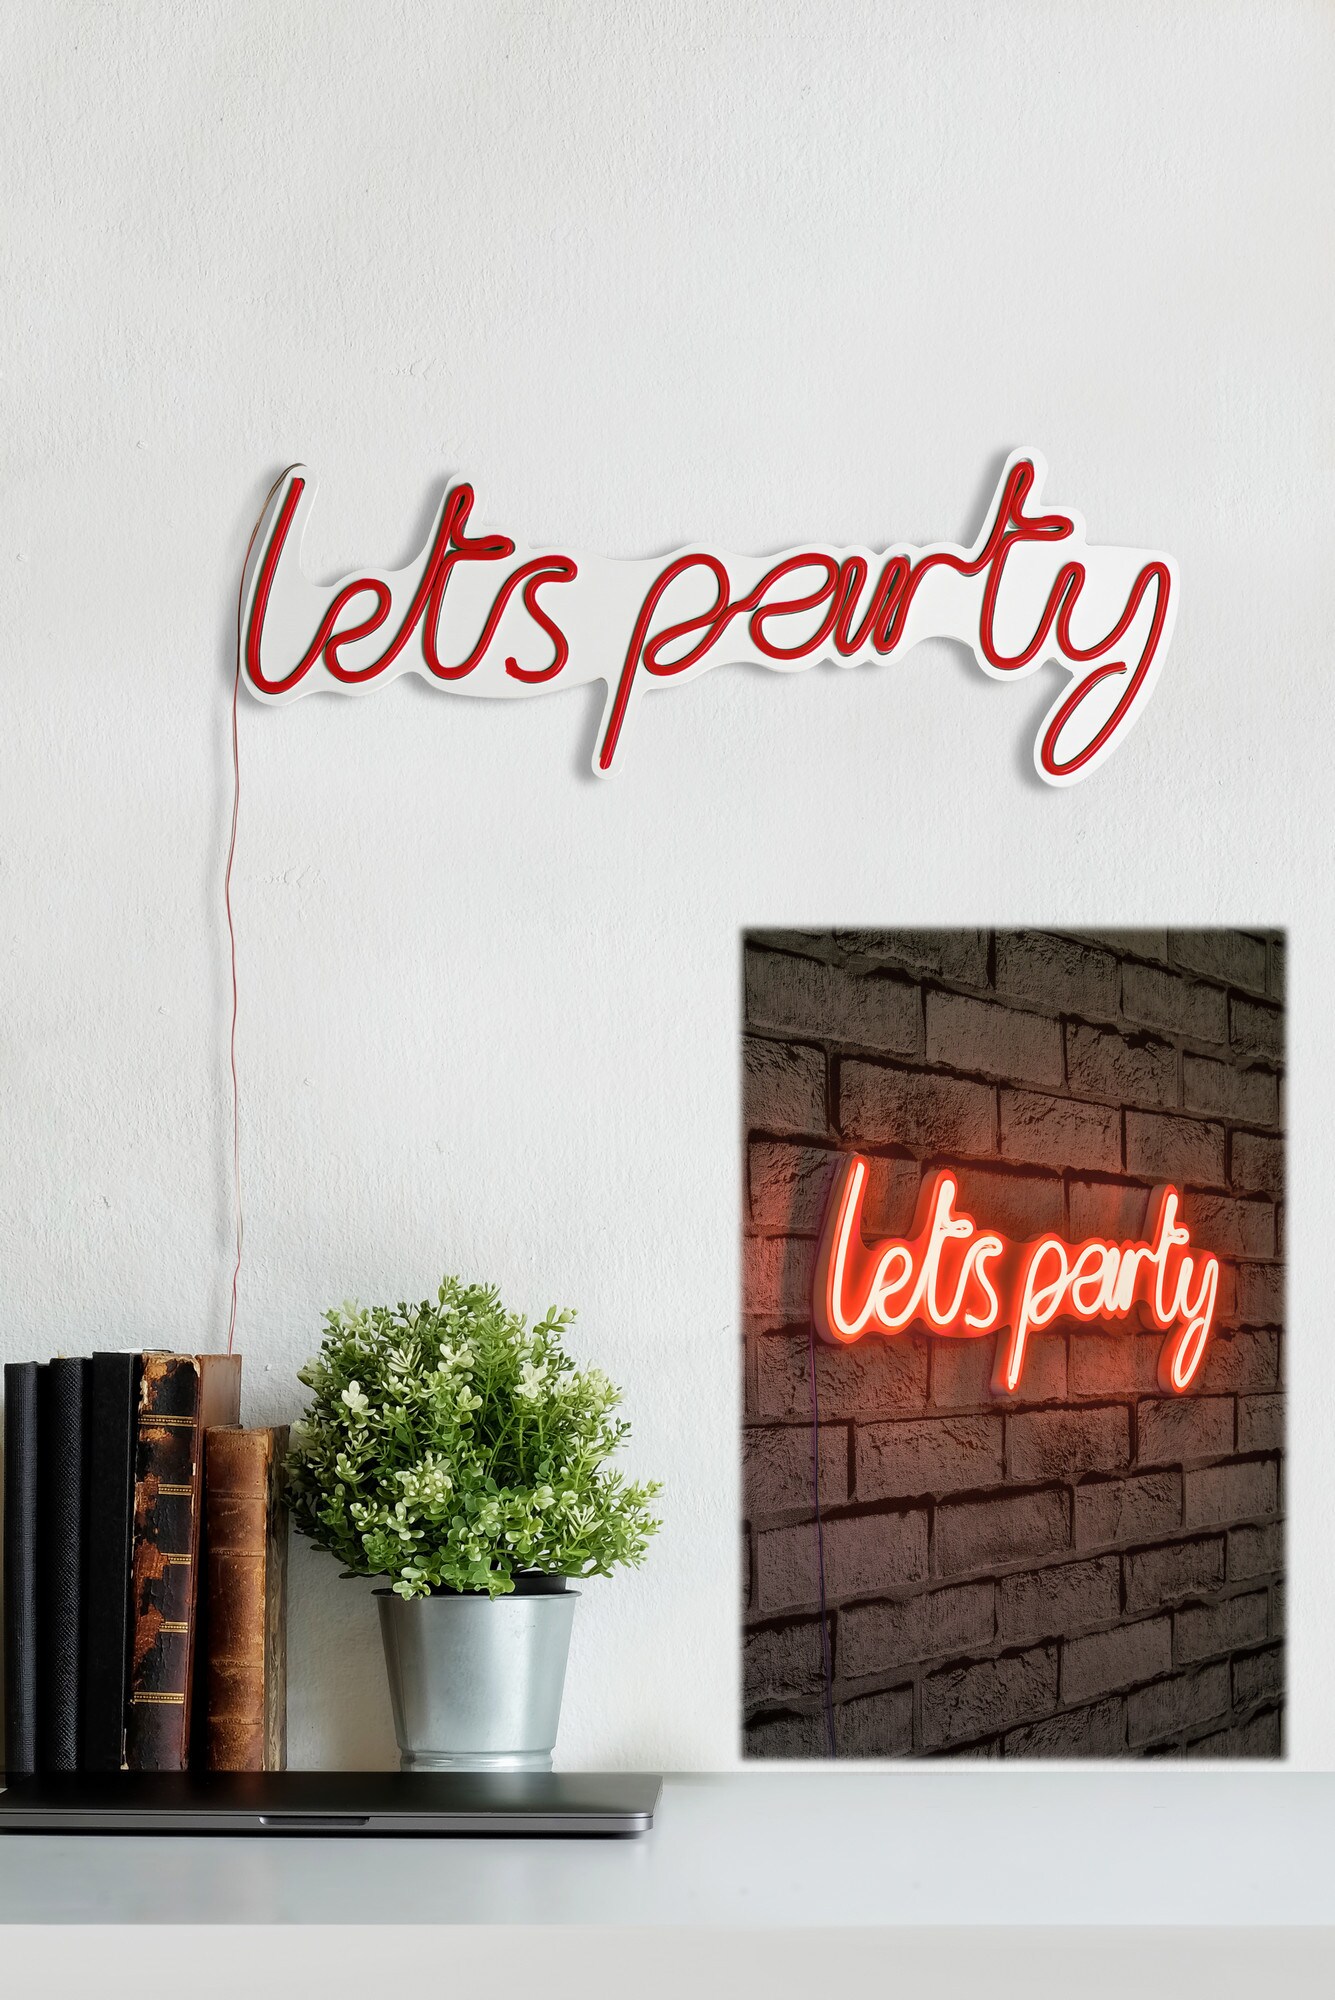 Let's Party LED Neon Light Wall Decor